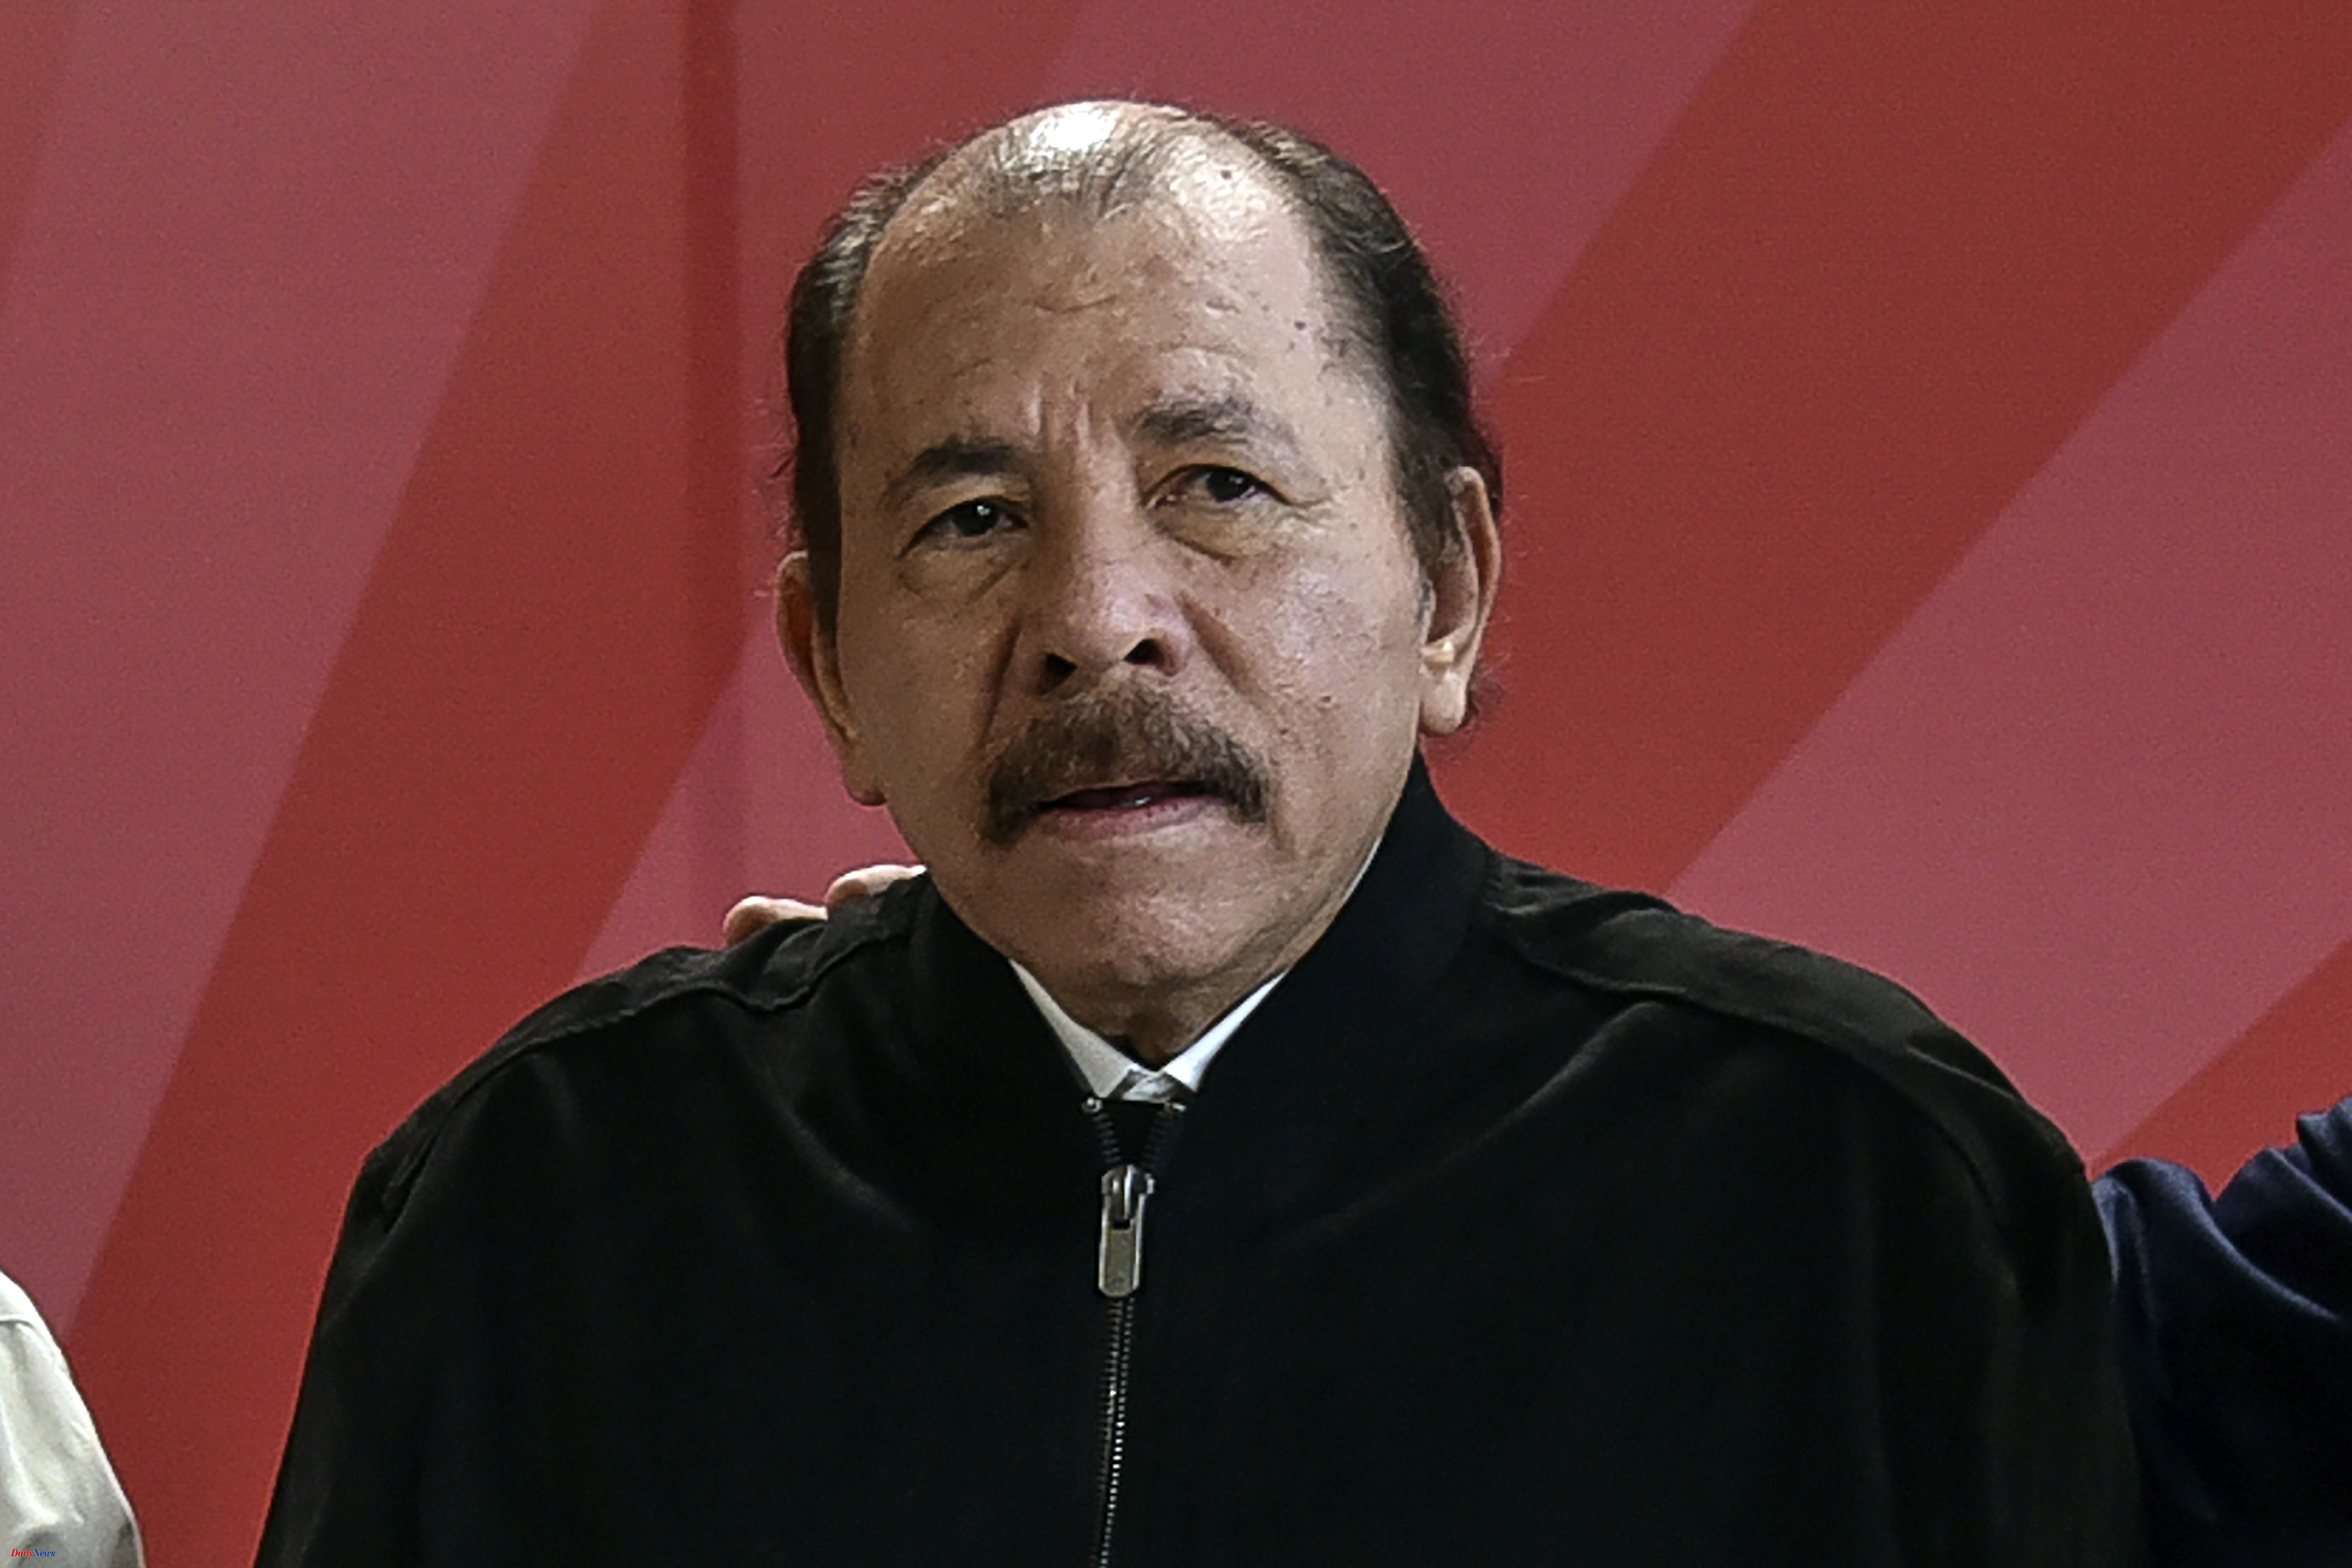 Nicaragua Ortega advances in his plan to become the Kim Jong-un of the Americas